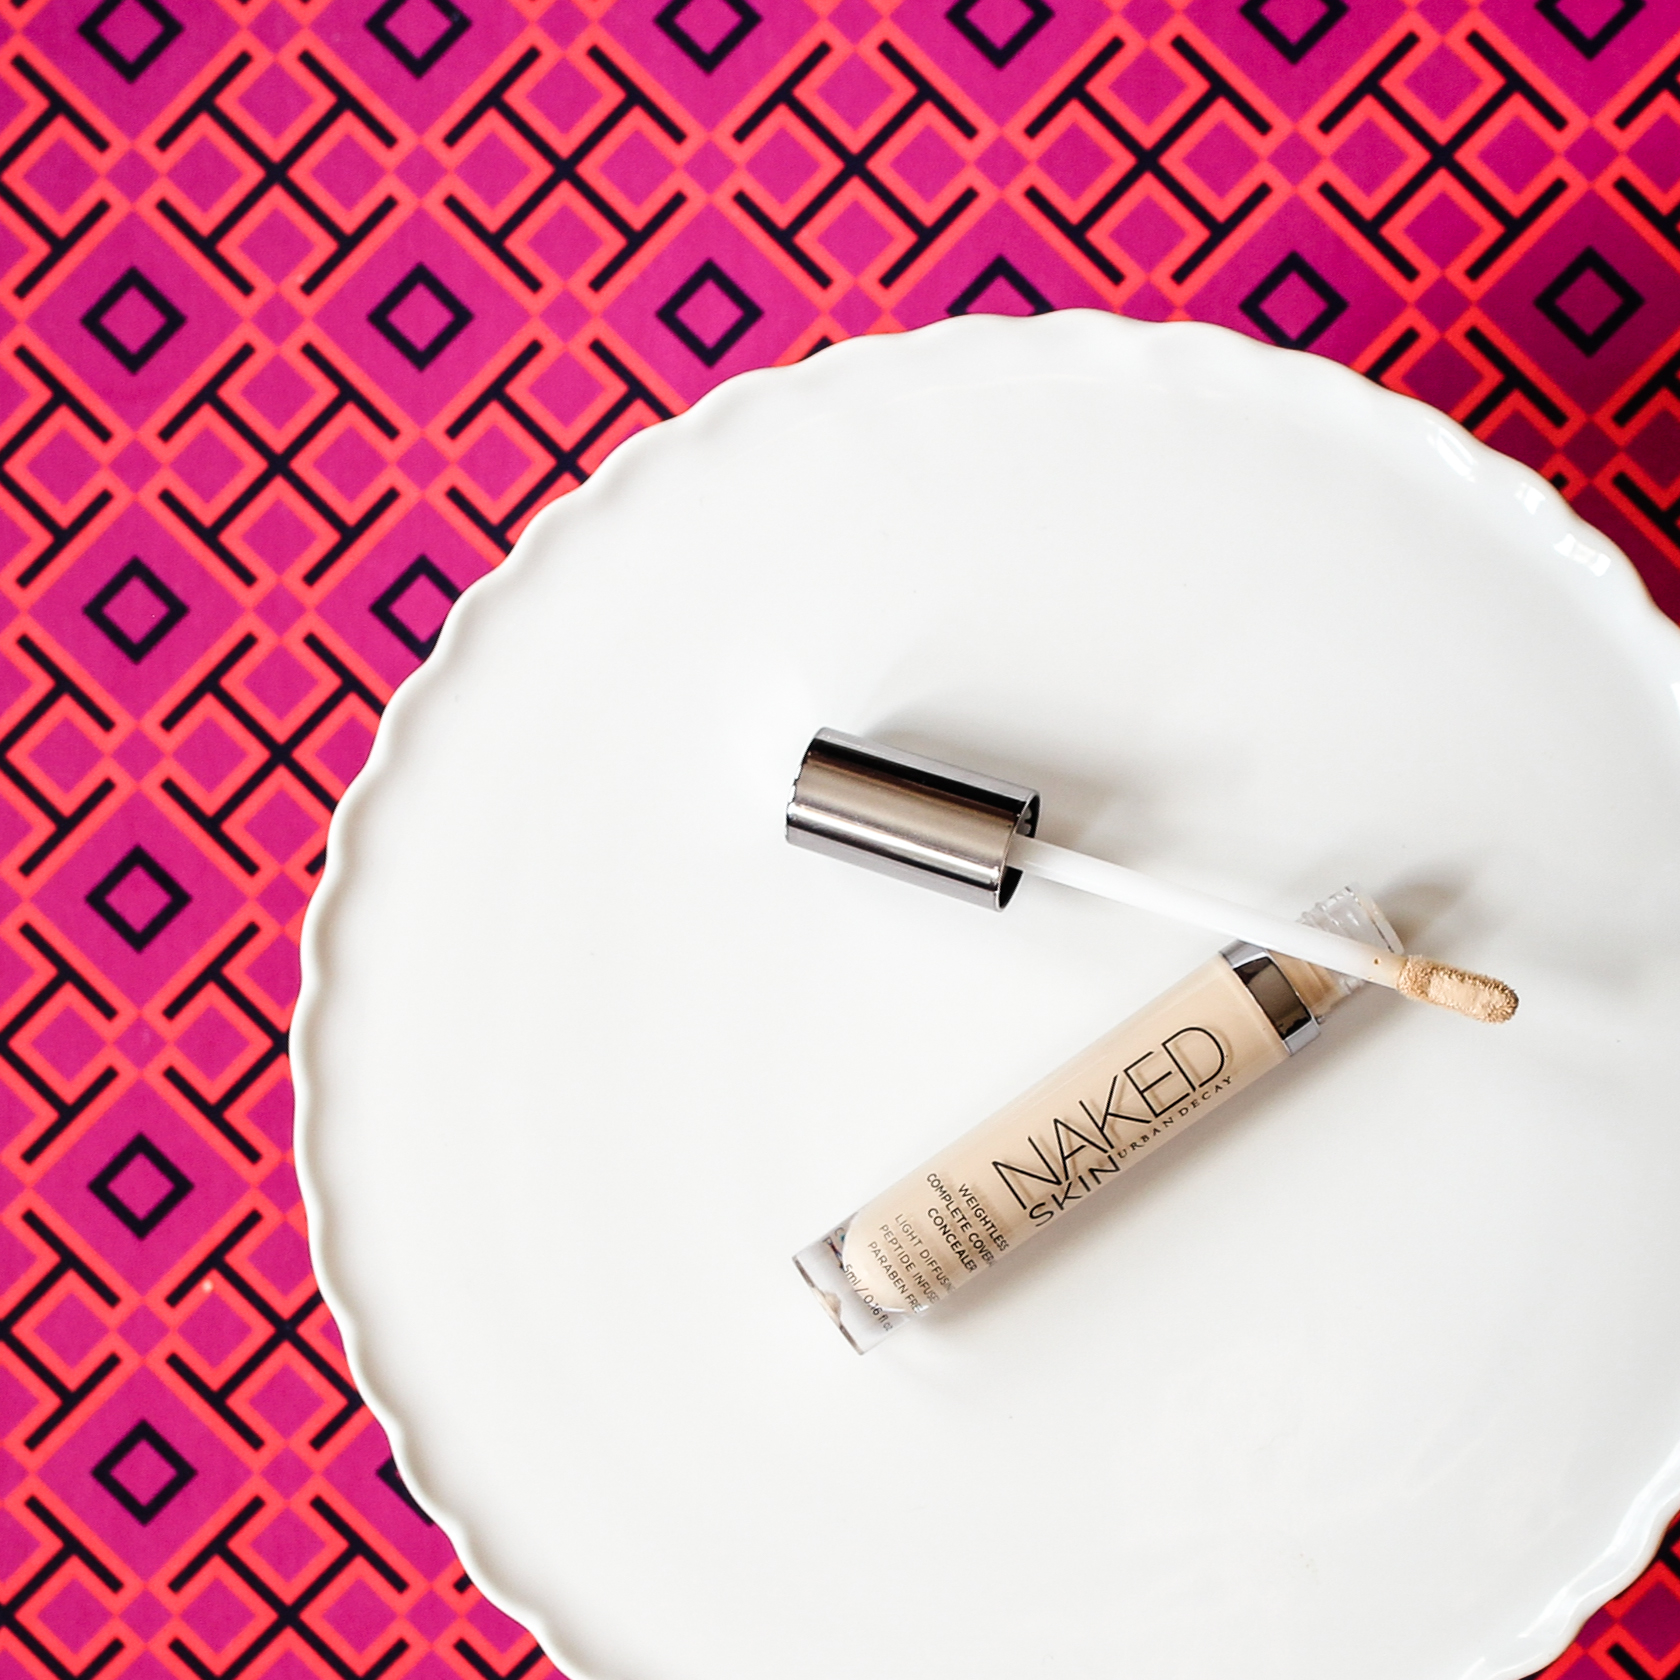 Urban Decay Weightless Complete Coverage Concealer